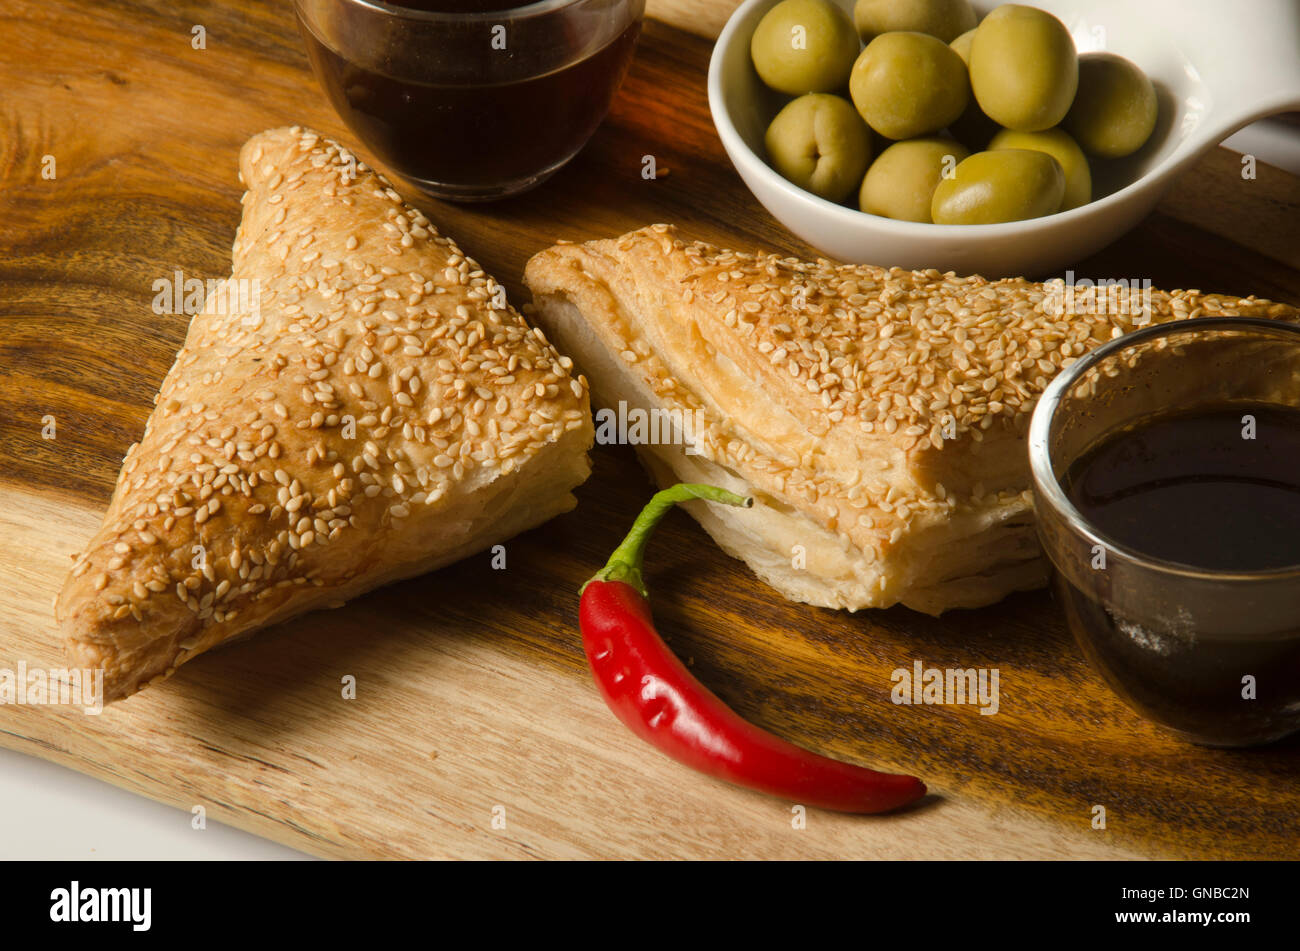 Borek (Also Burek) a Turkish pastry filled with cheese or potato or mushroom with green olives Stock Photo